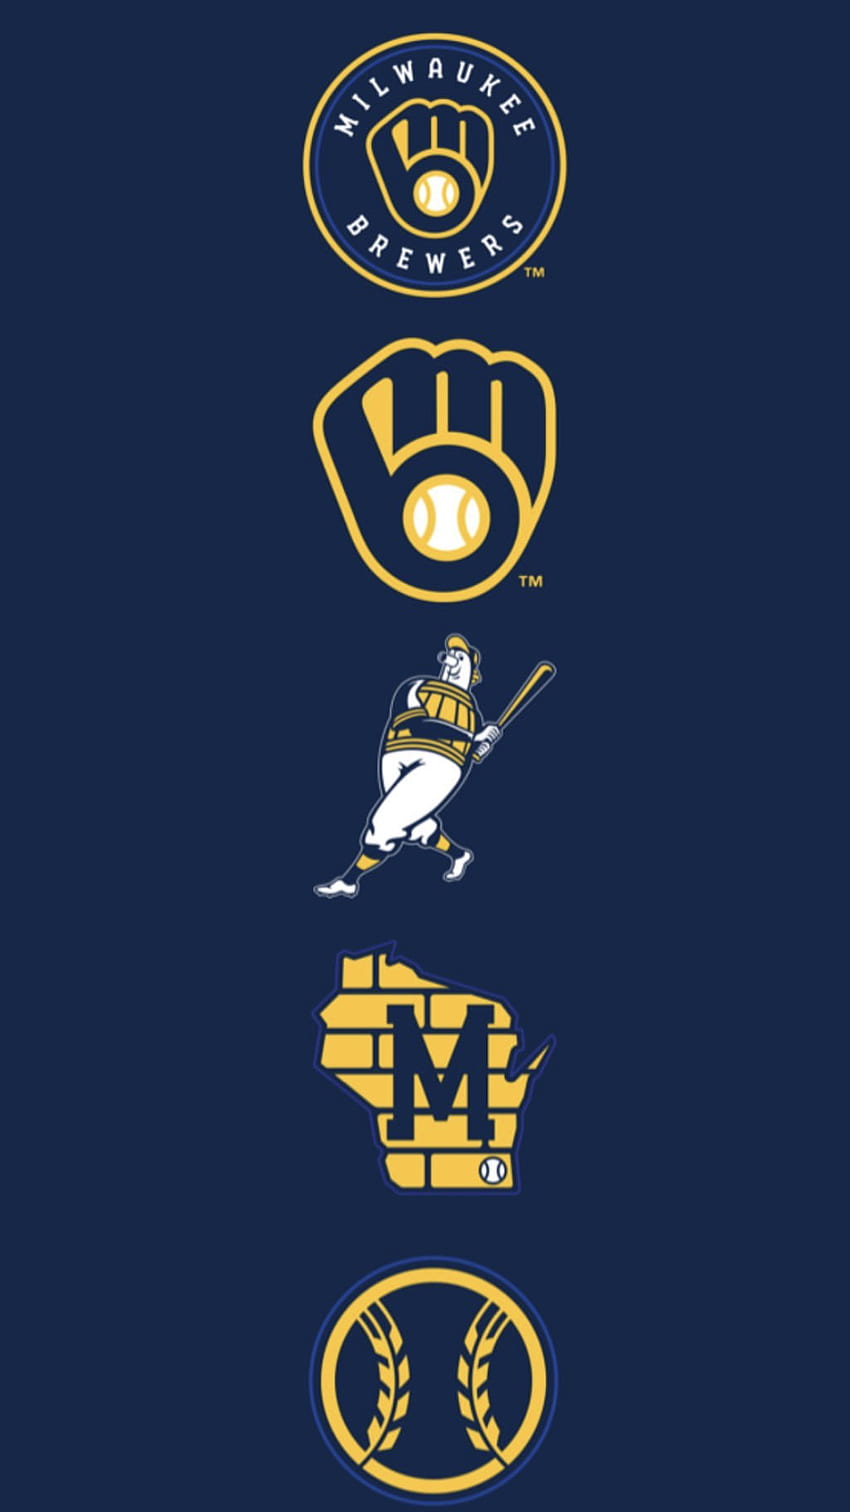 Bringing back the greatest logo in baseball history for 2020! HD phone wallpaper